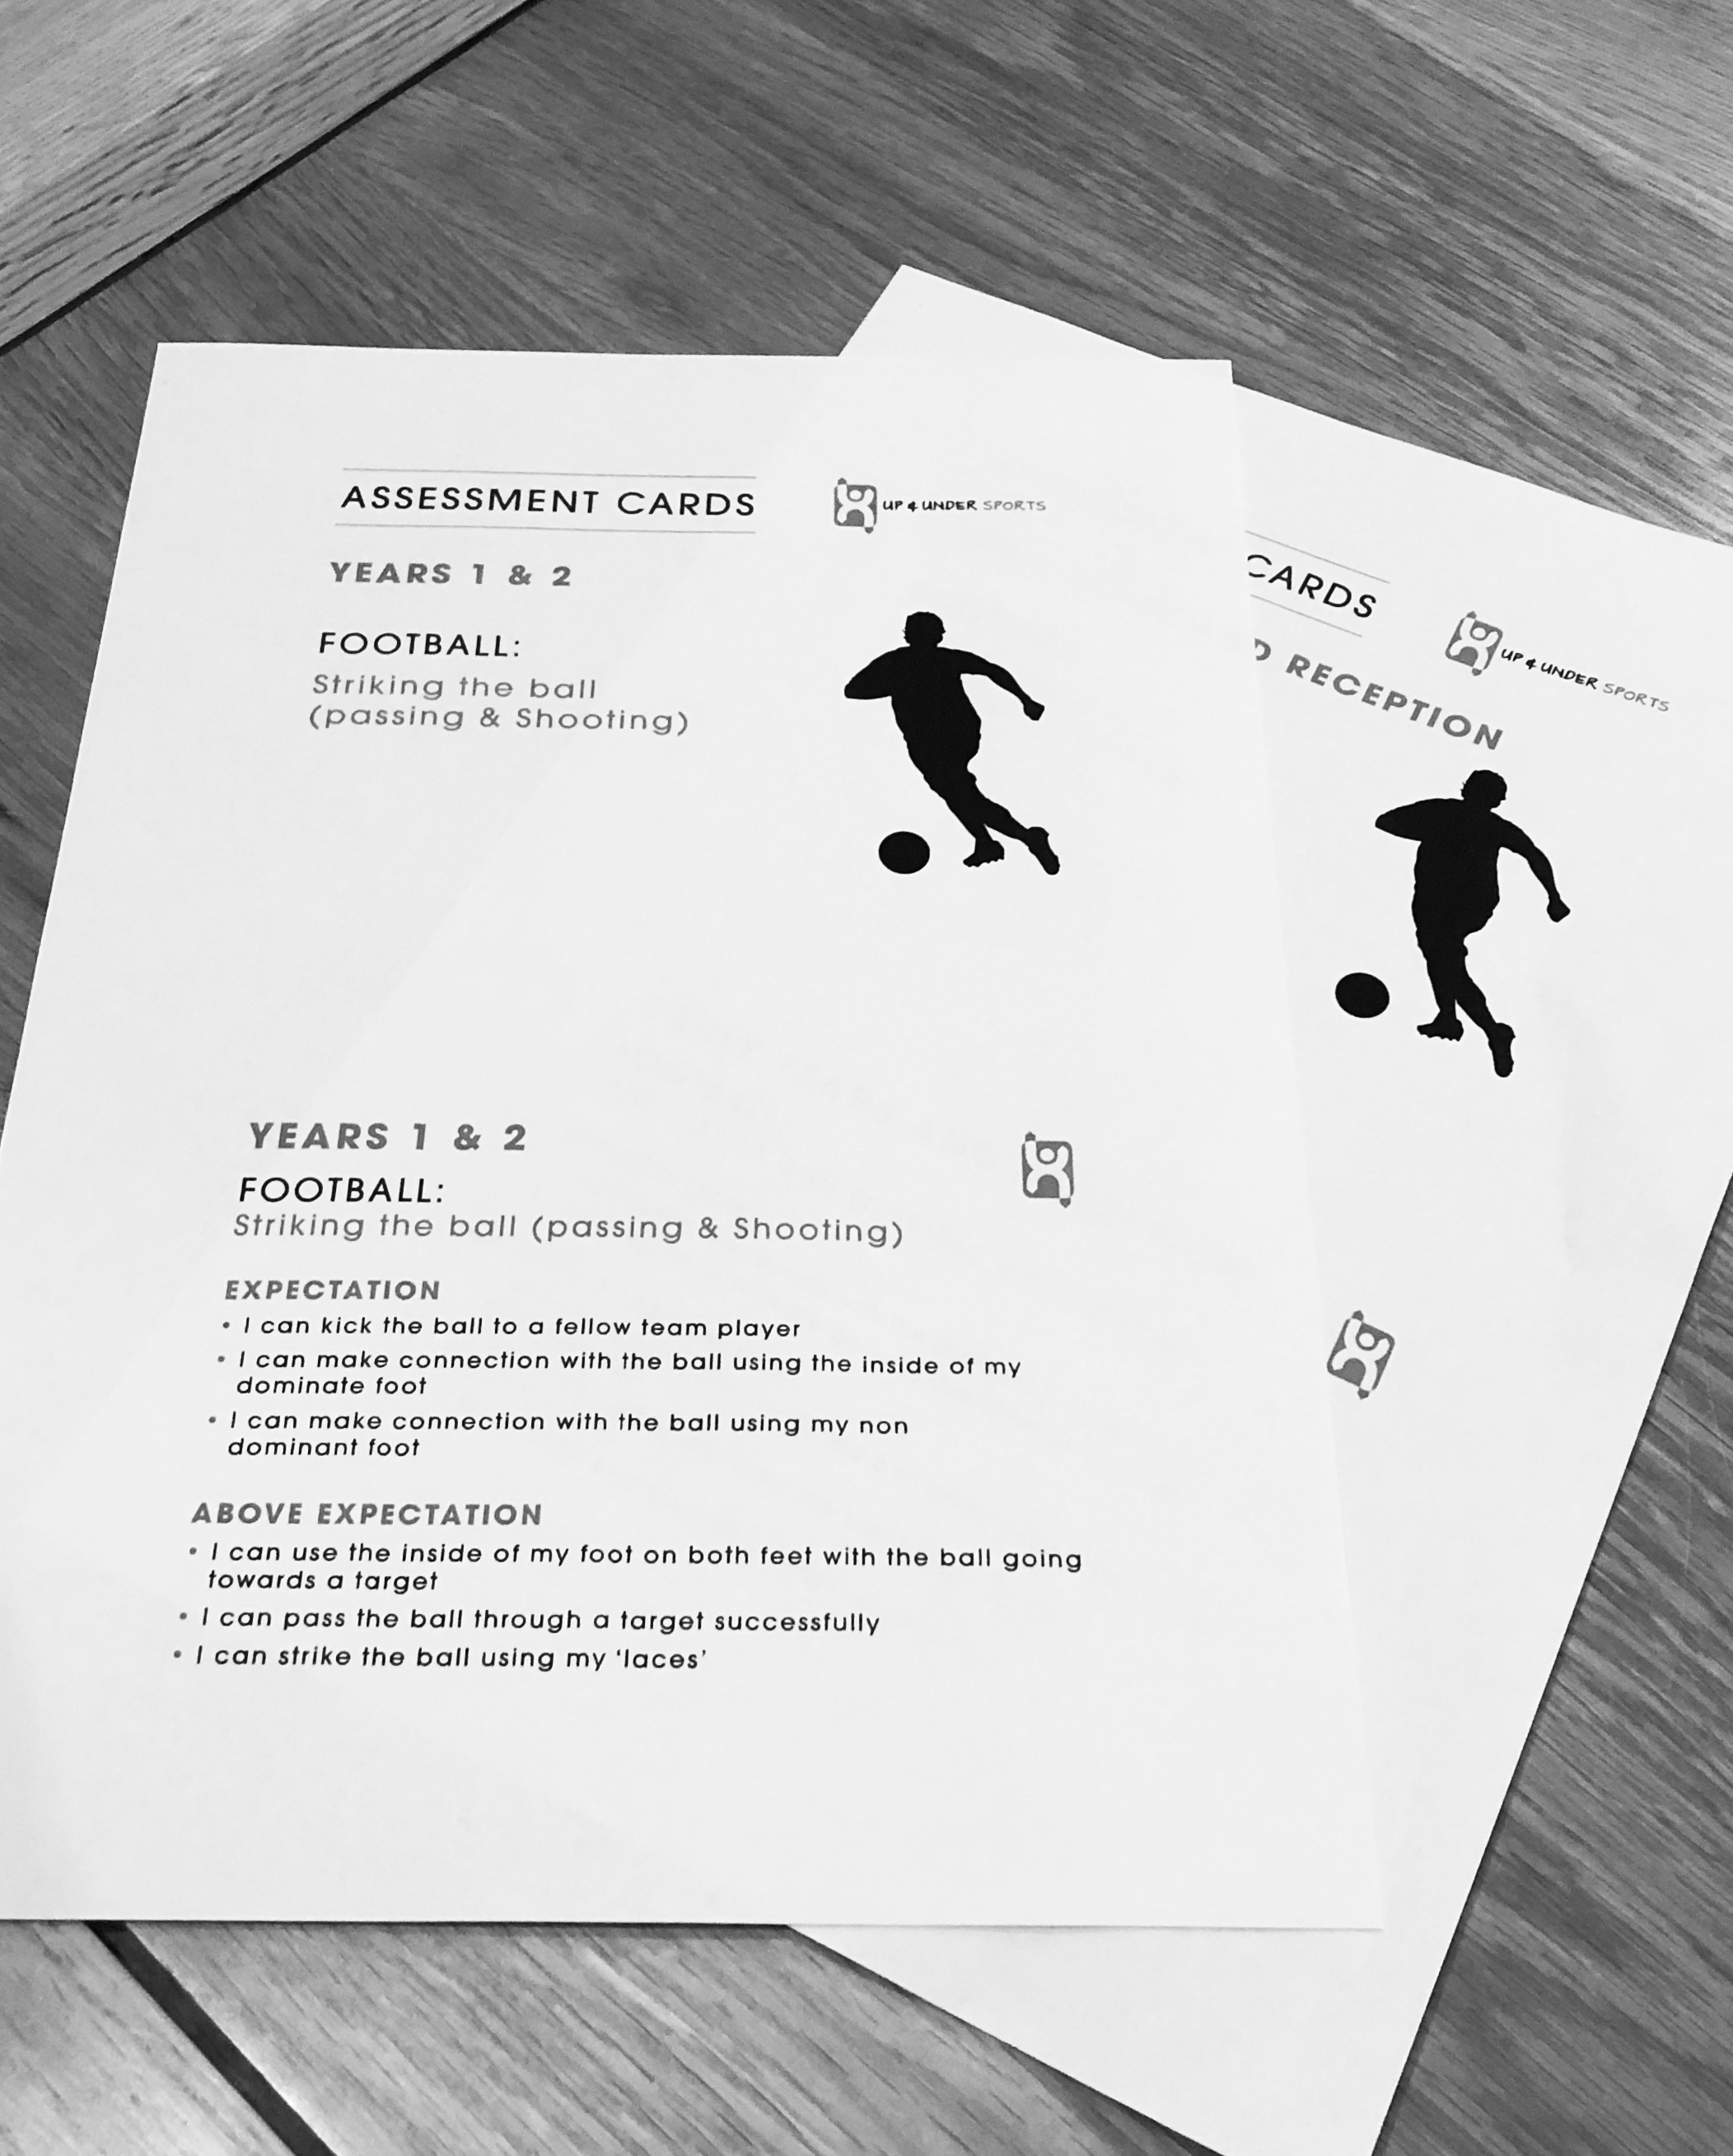 New to Up & Under Sports – Assessment Cards